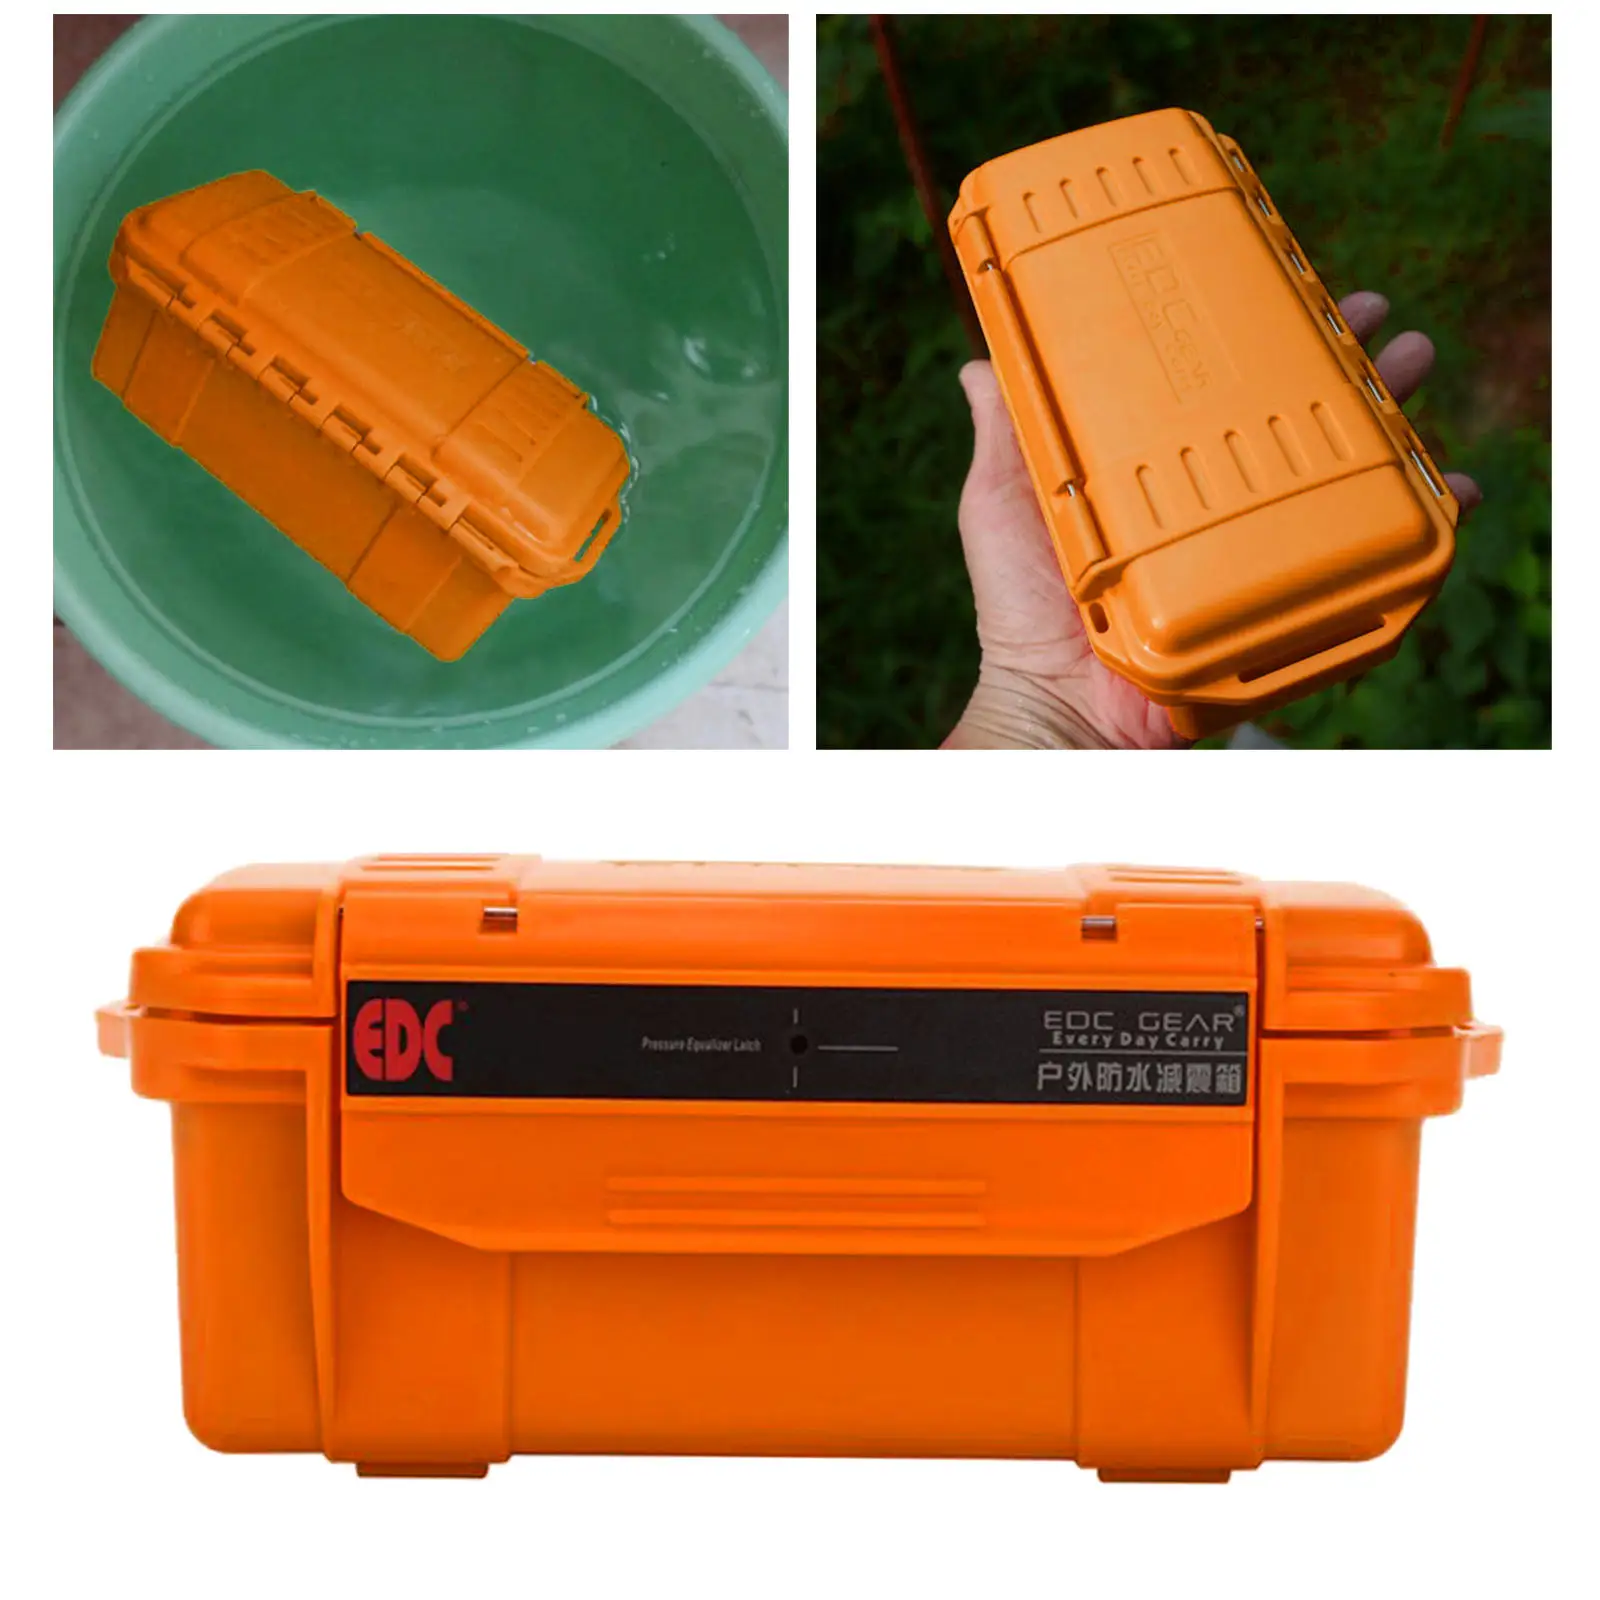 Outdoor Shockproof Waterproof Boxes Survival Airtight Case Holder Storage Tools Travel Sealed Containers 4 Colors